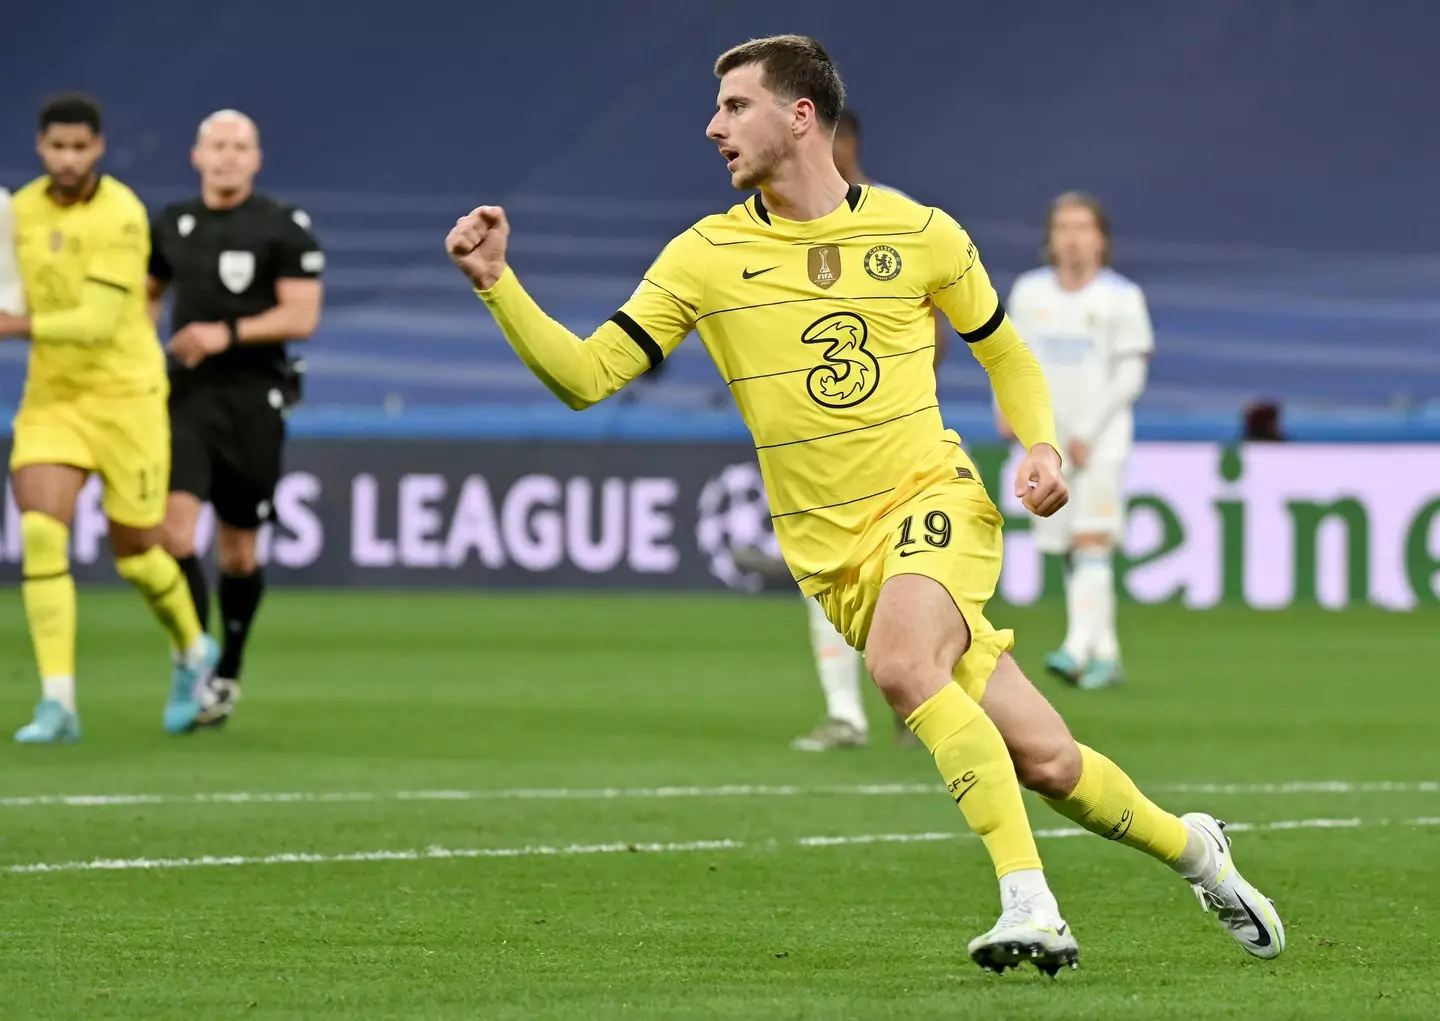 Mason Mount scores for Chelsea against Real Madrid in the Champions League quarter-finals. (Alamy)